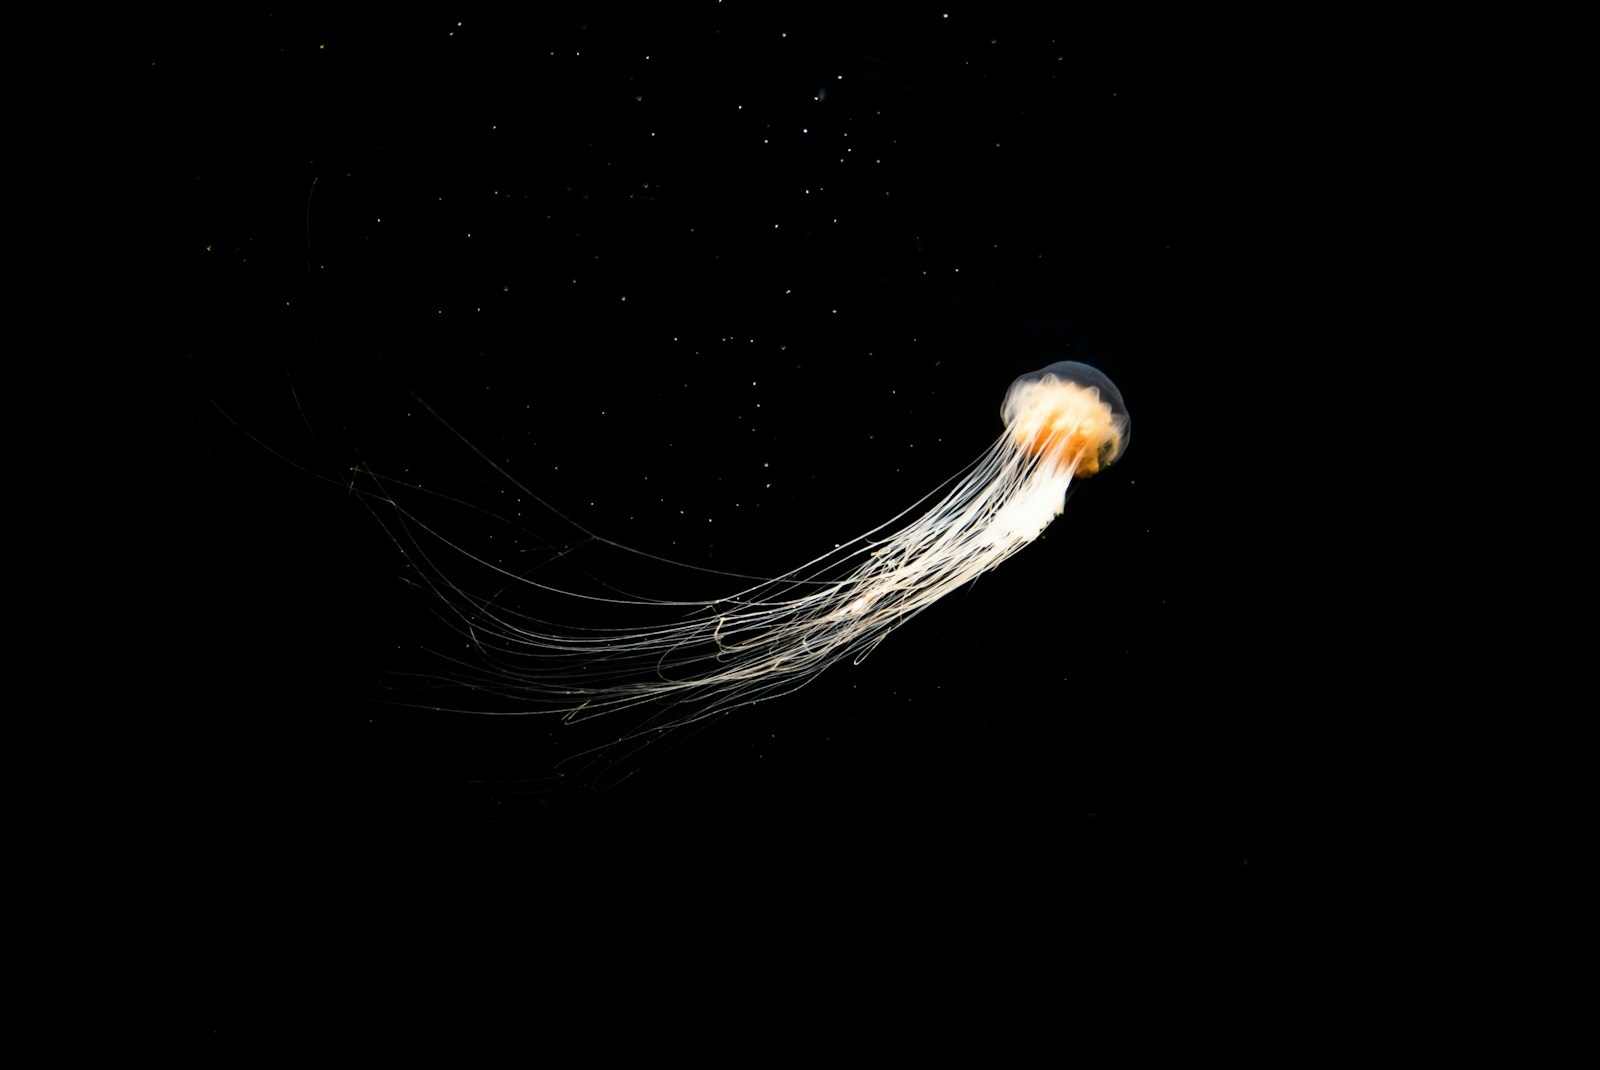 Leica D-Lux (Typ 109) sample photo. Yellow and white jellyfish photography